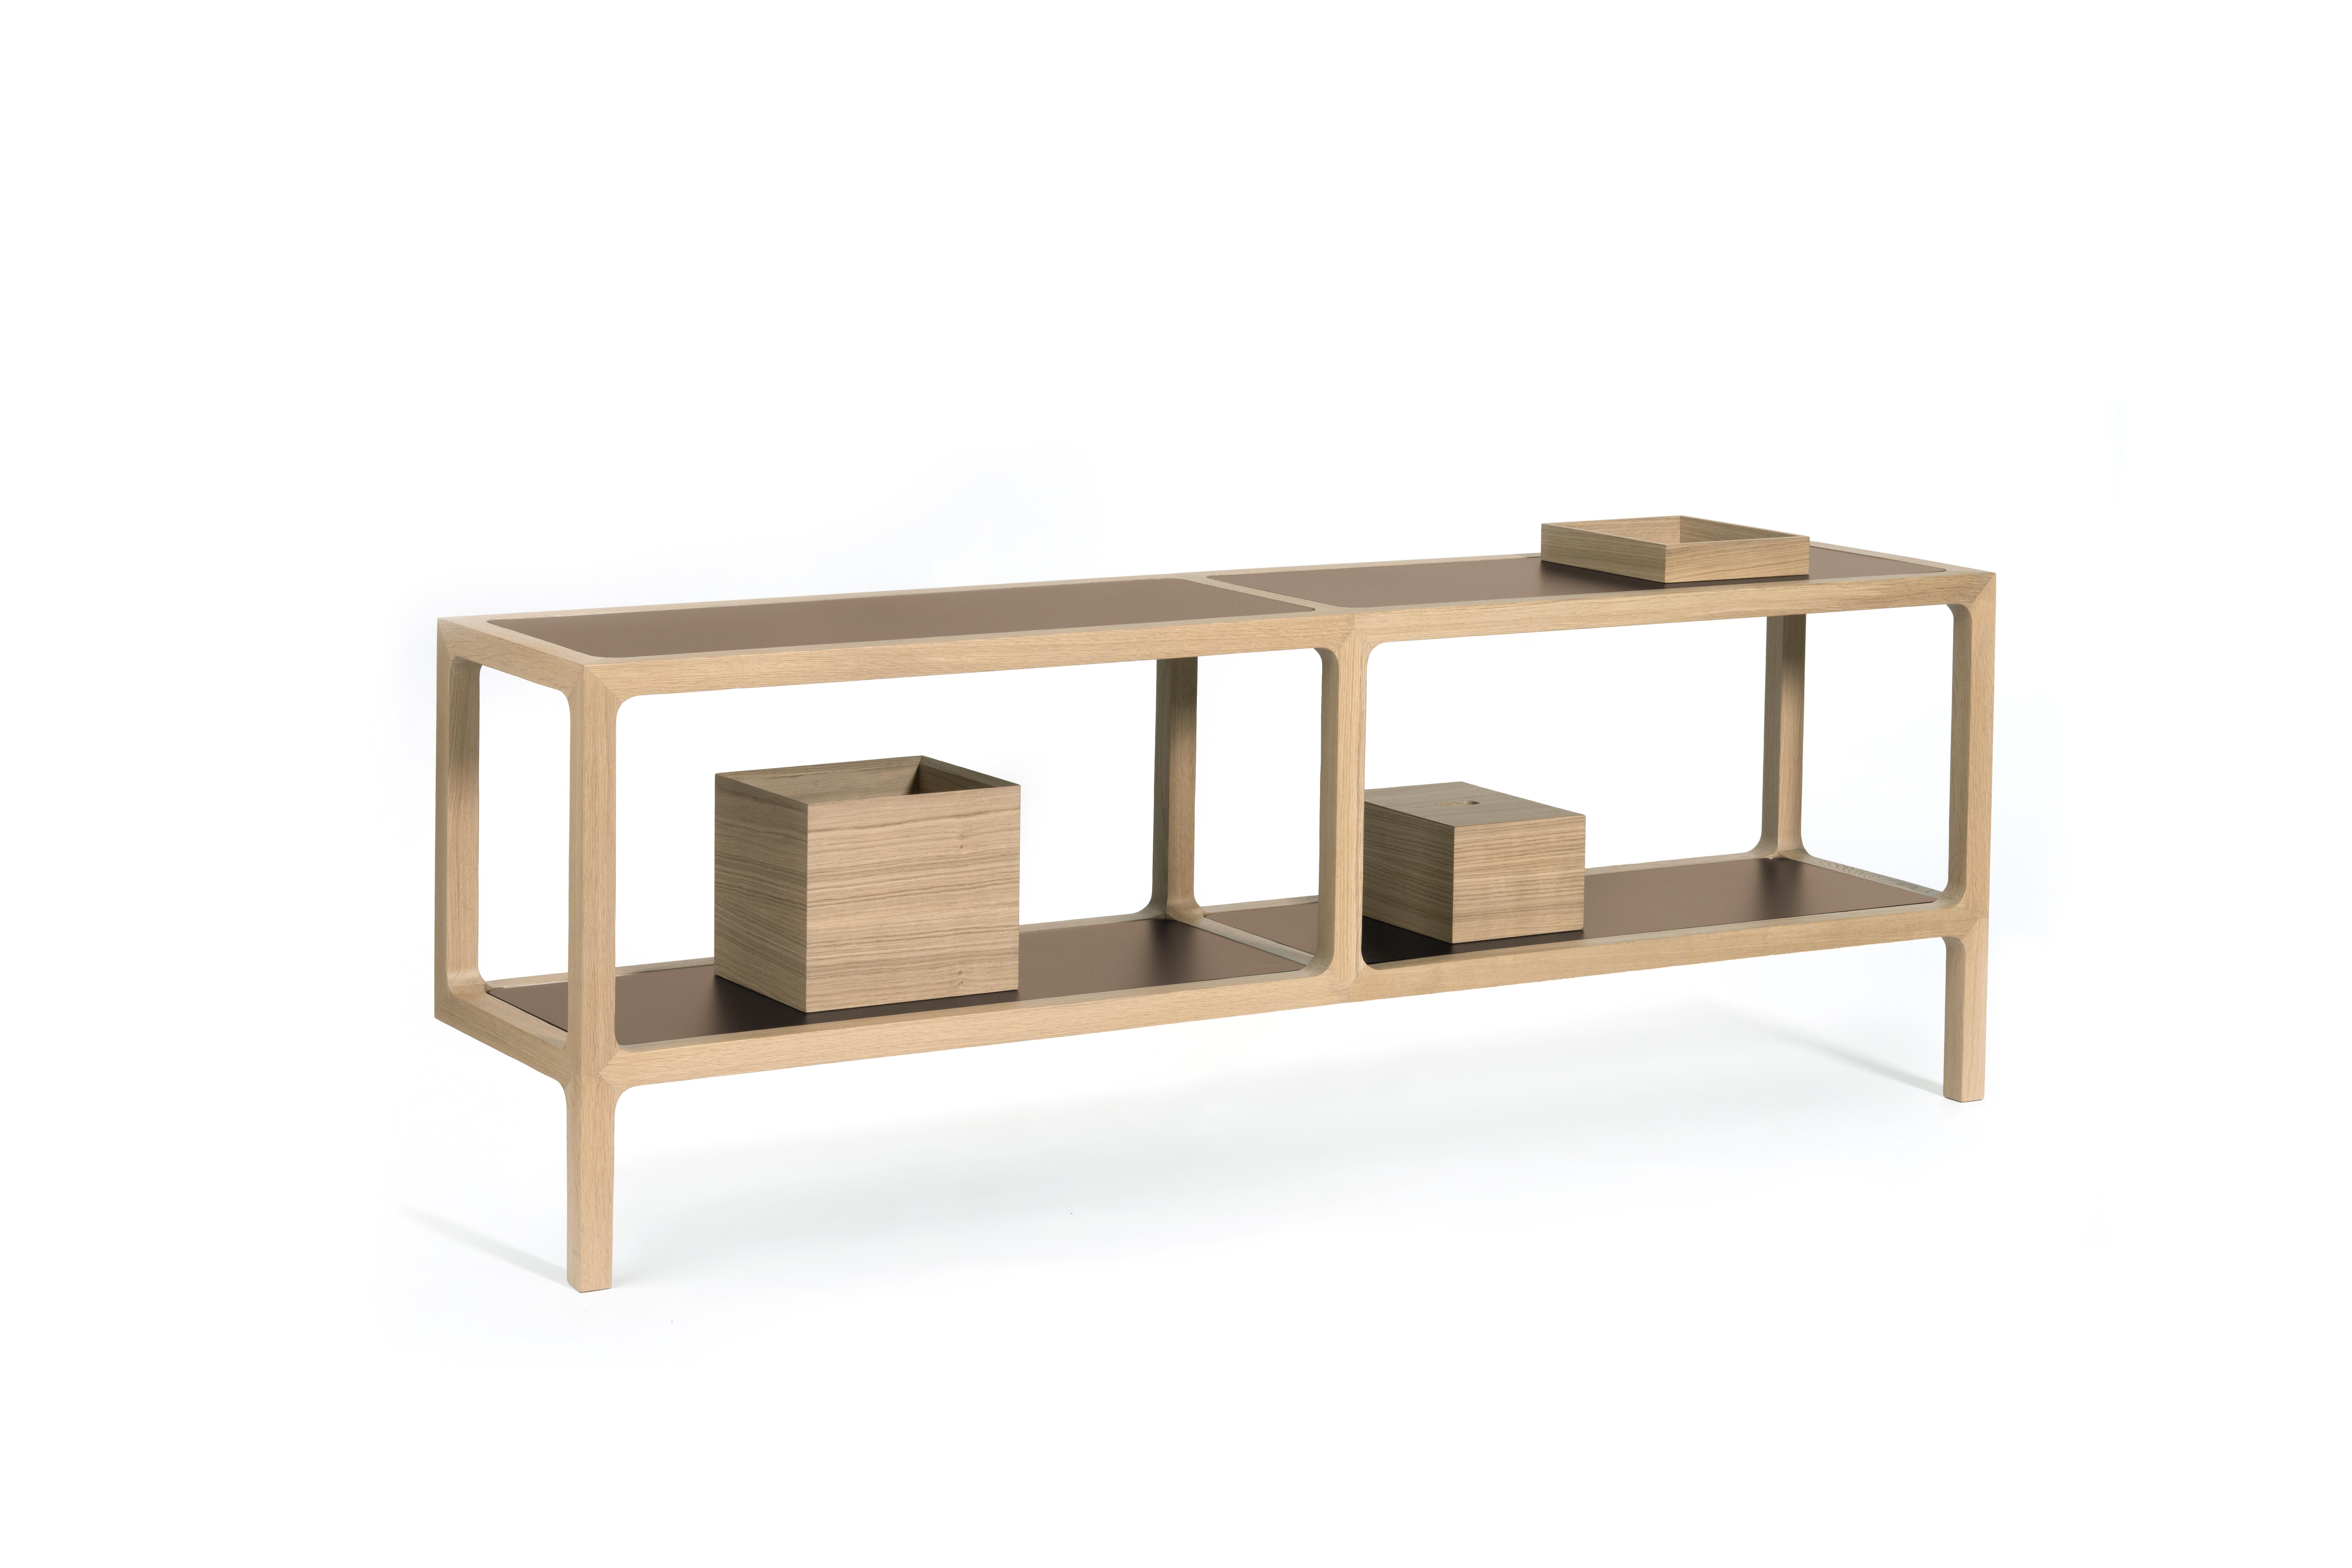 More box 25 by Mentemano
Dimensions: w 20 x d 28 x h 25 cm
Materials: Oak


A tray and two boxes available in two dimensions with cover, made of wood with bronze mirror inserts as possible option.


Mentemano is a design concept brand